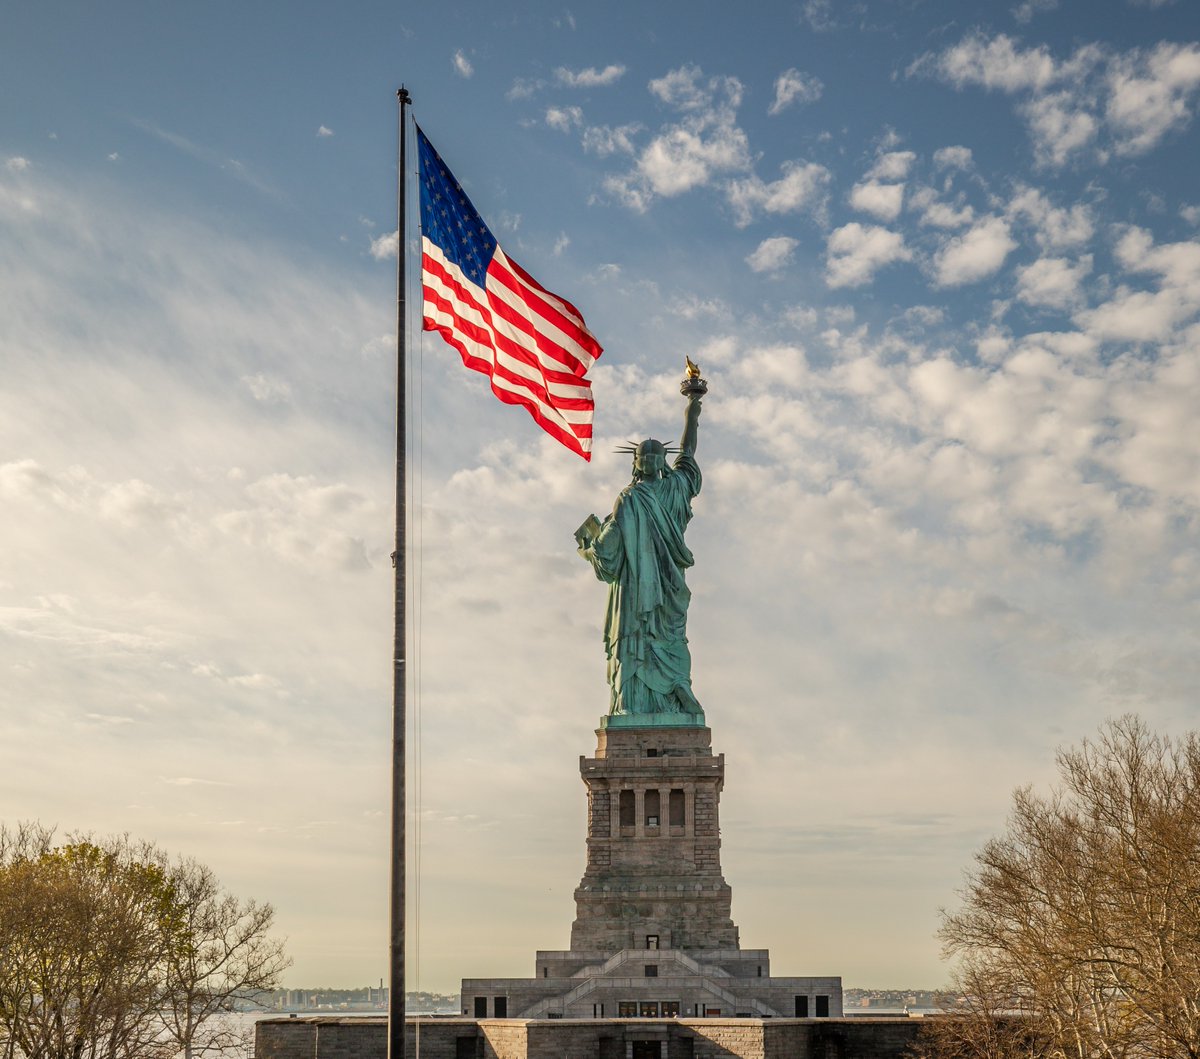 On this Memorial Day, we pay tribute to the brave Americans who sacrificed their lives for our nation. Today, we reflect on their dedication and the freedoms they defended. 🗽 #MemorialDay #StatueOfLiberty